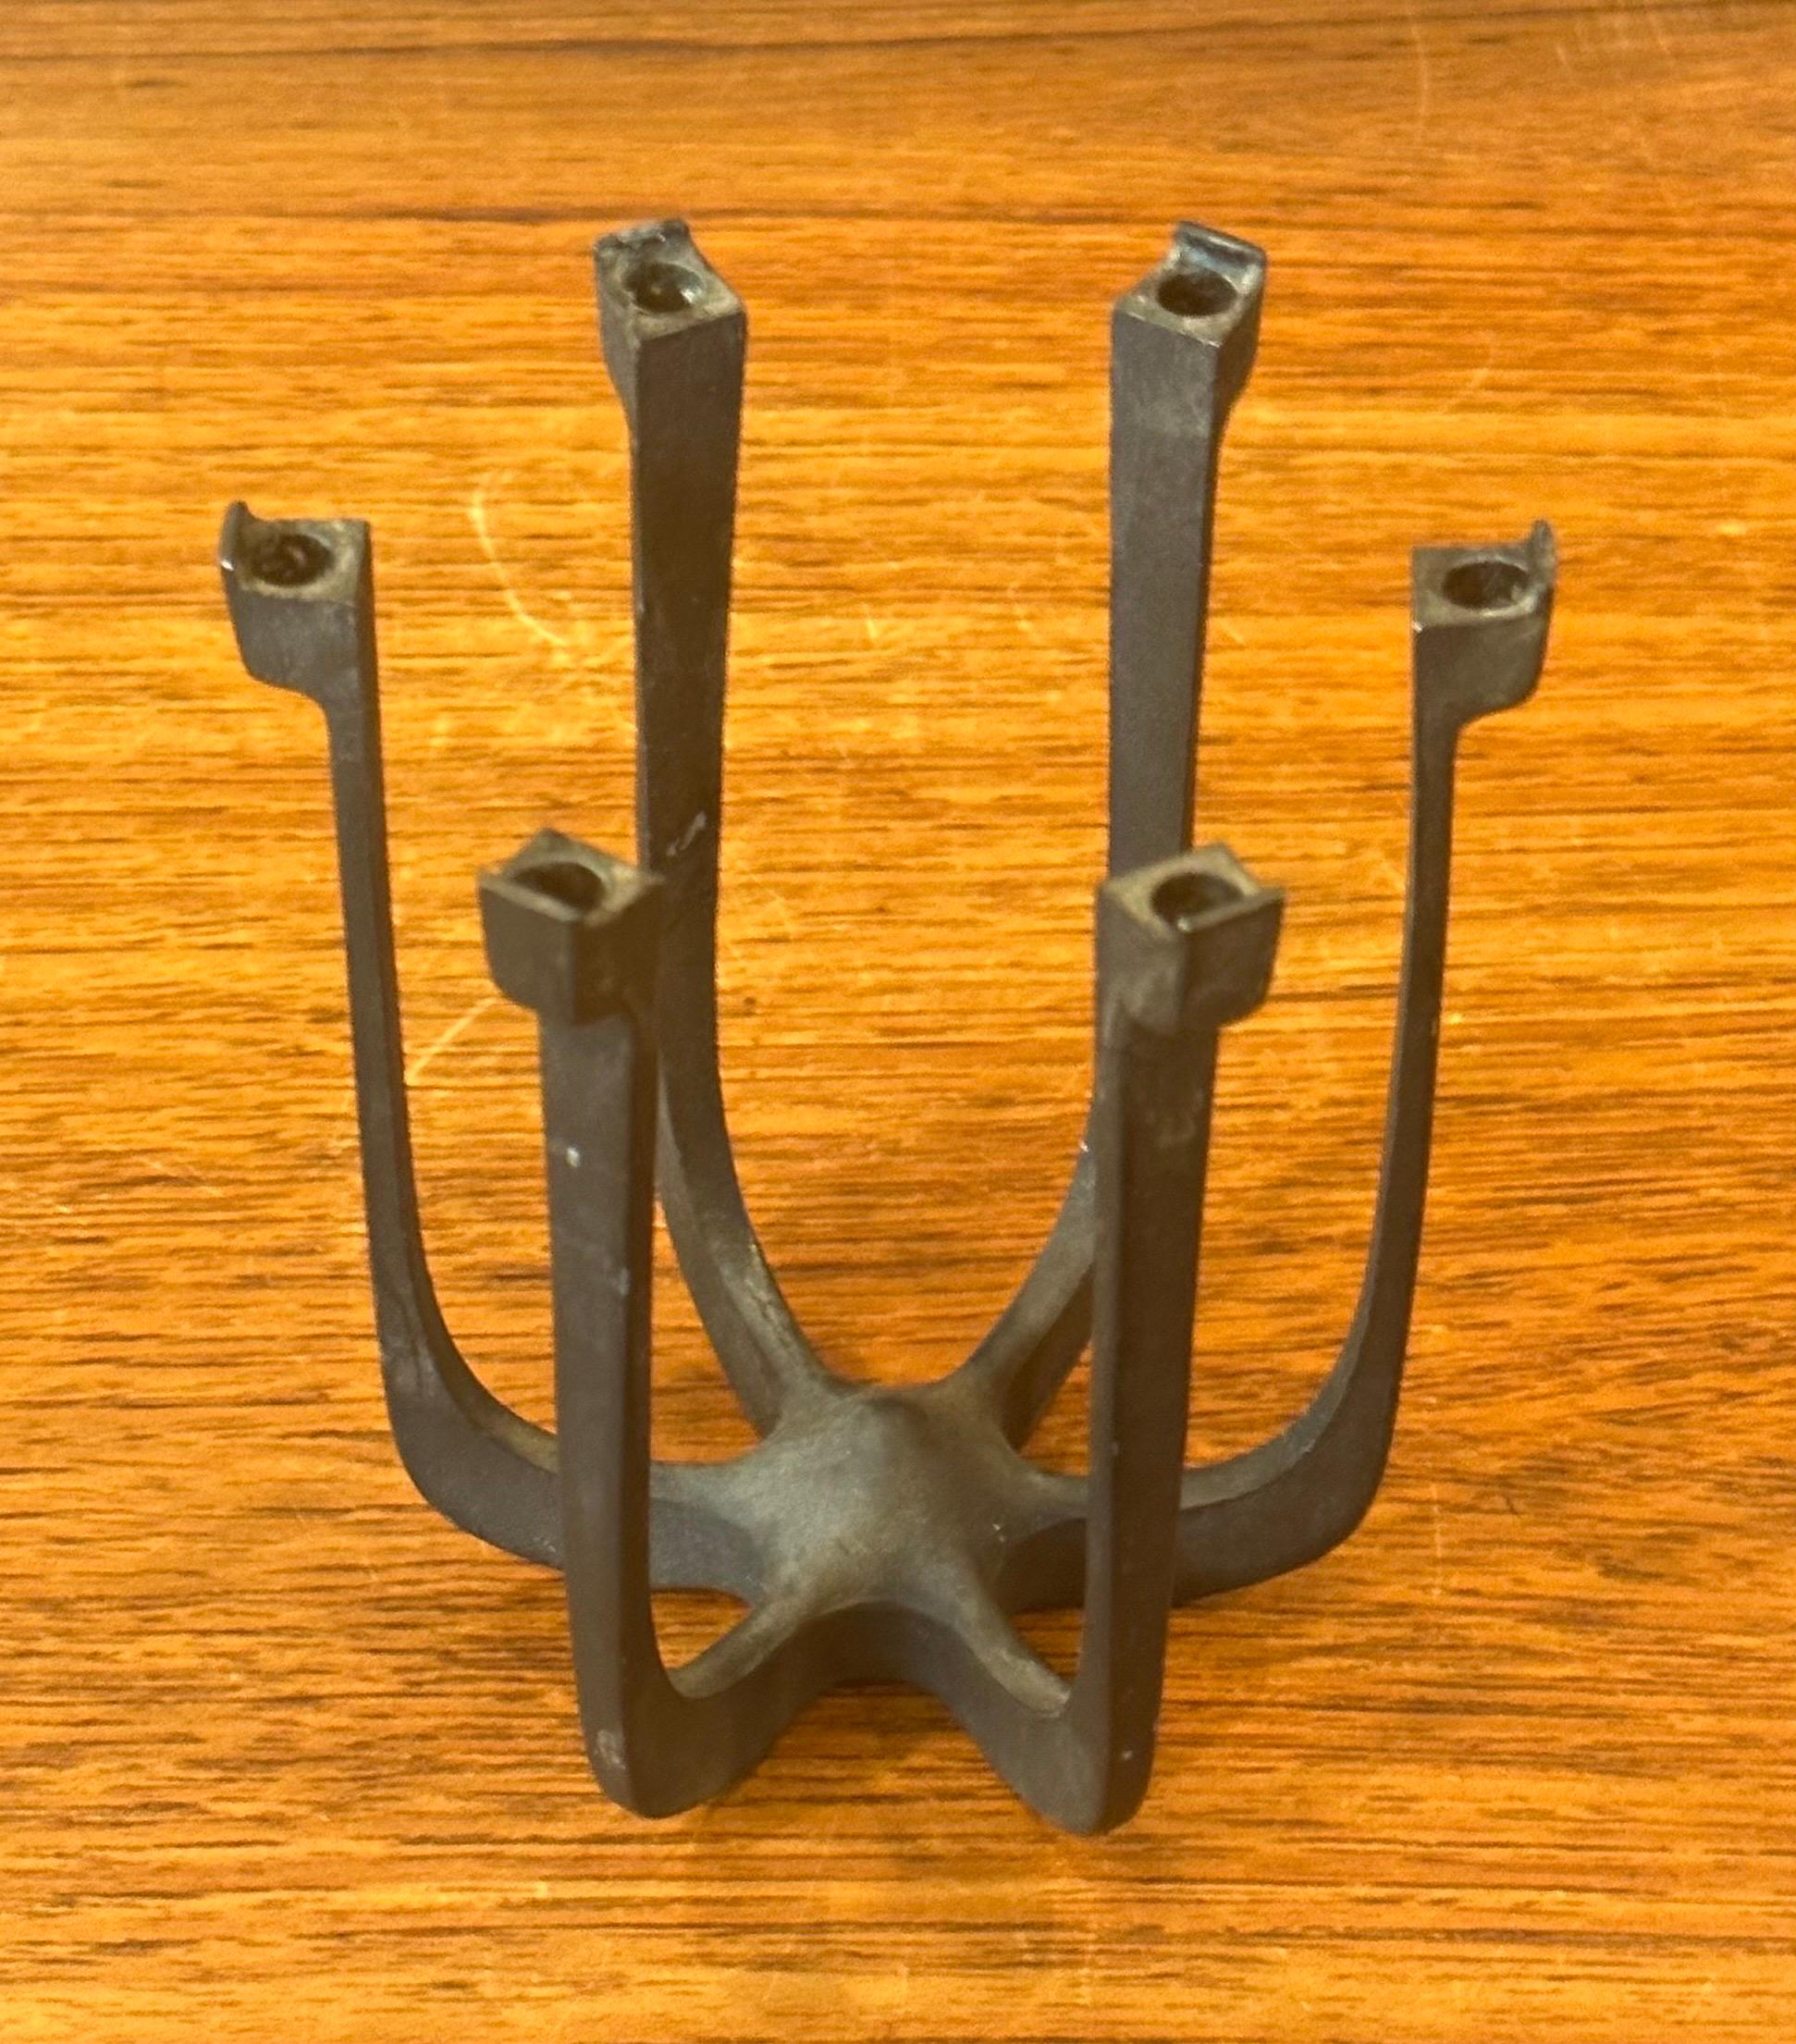 MCM Iron Candle Holder by Gunnar Cyren Lysestager for Dansk In Good Condition For Sale In San Diego, CA